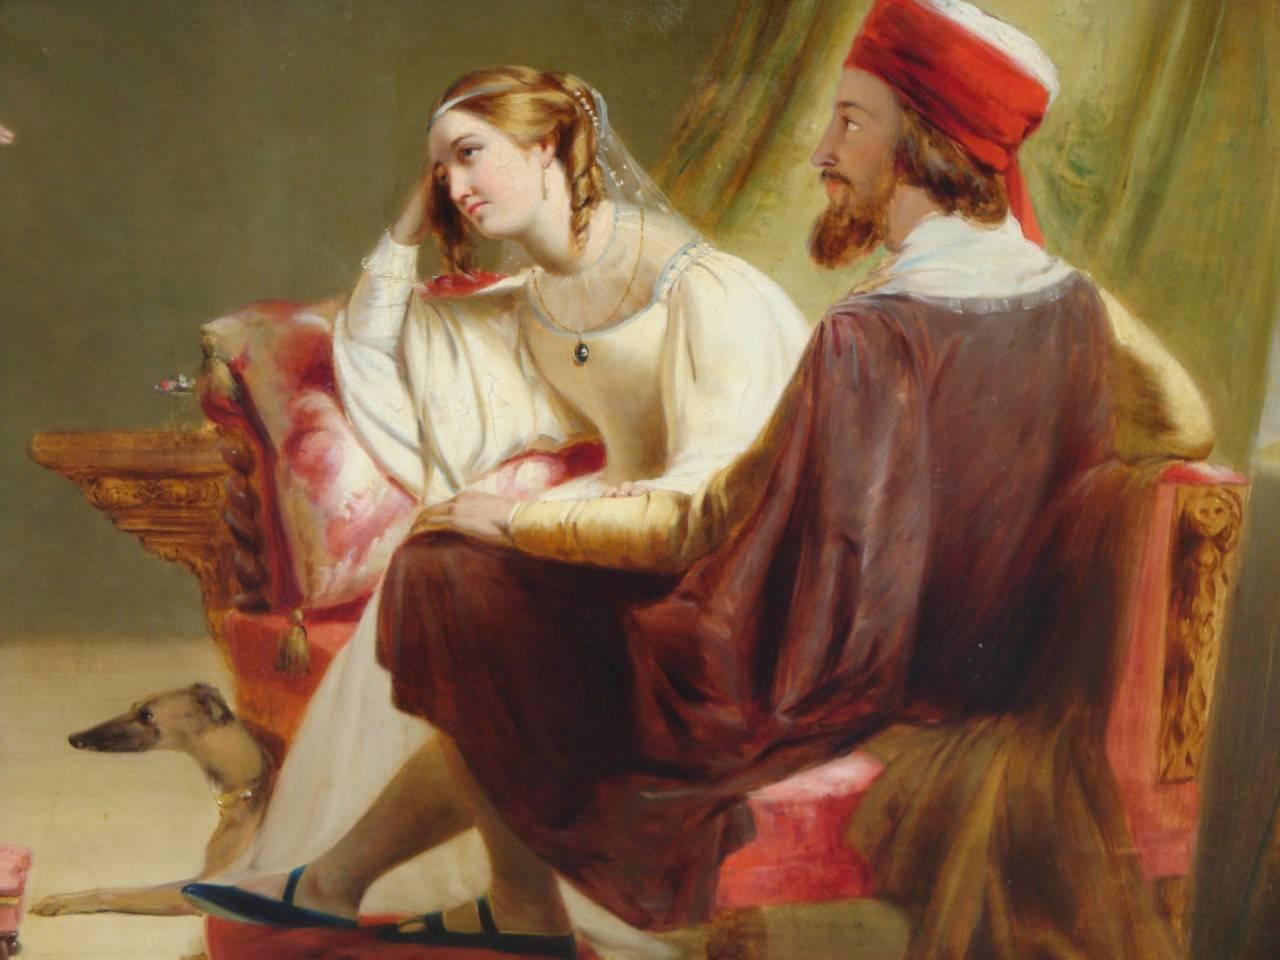 An outstanding beautiful rare old master 19th century painting of a maiden telling news to a couple. The maiden, resting one foot on stool and dressed in bell attire and scarf head band on hair, delivering news to a royal couple dressed elaborately